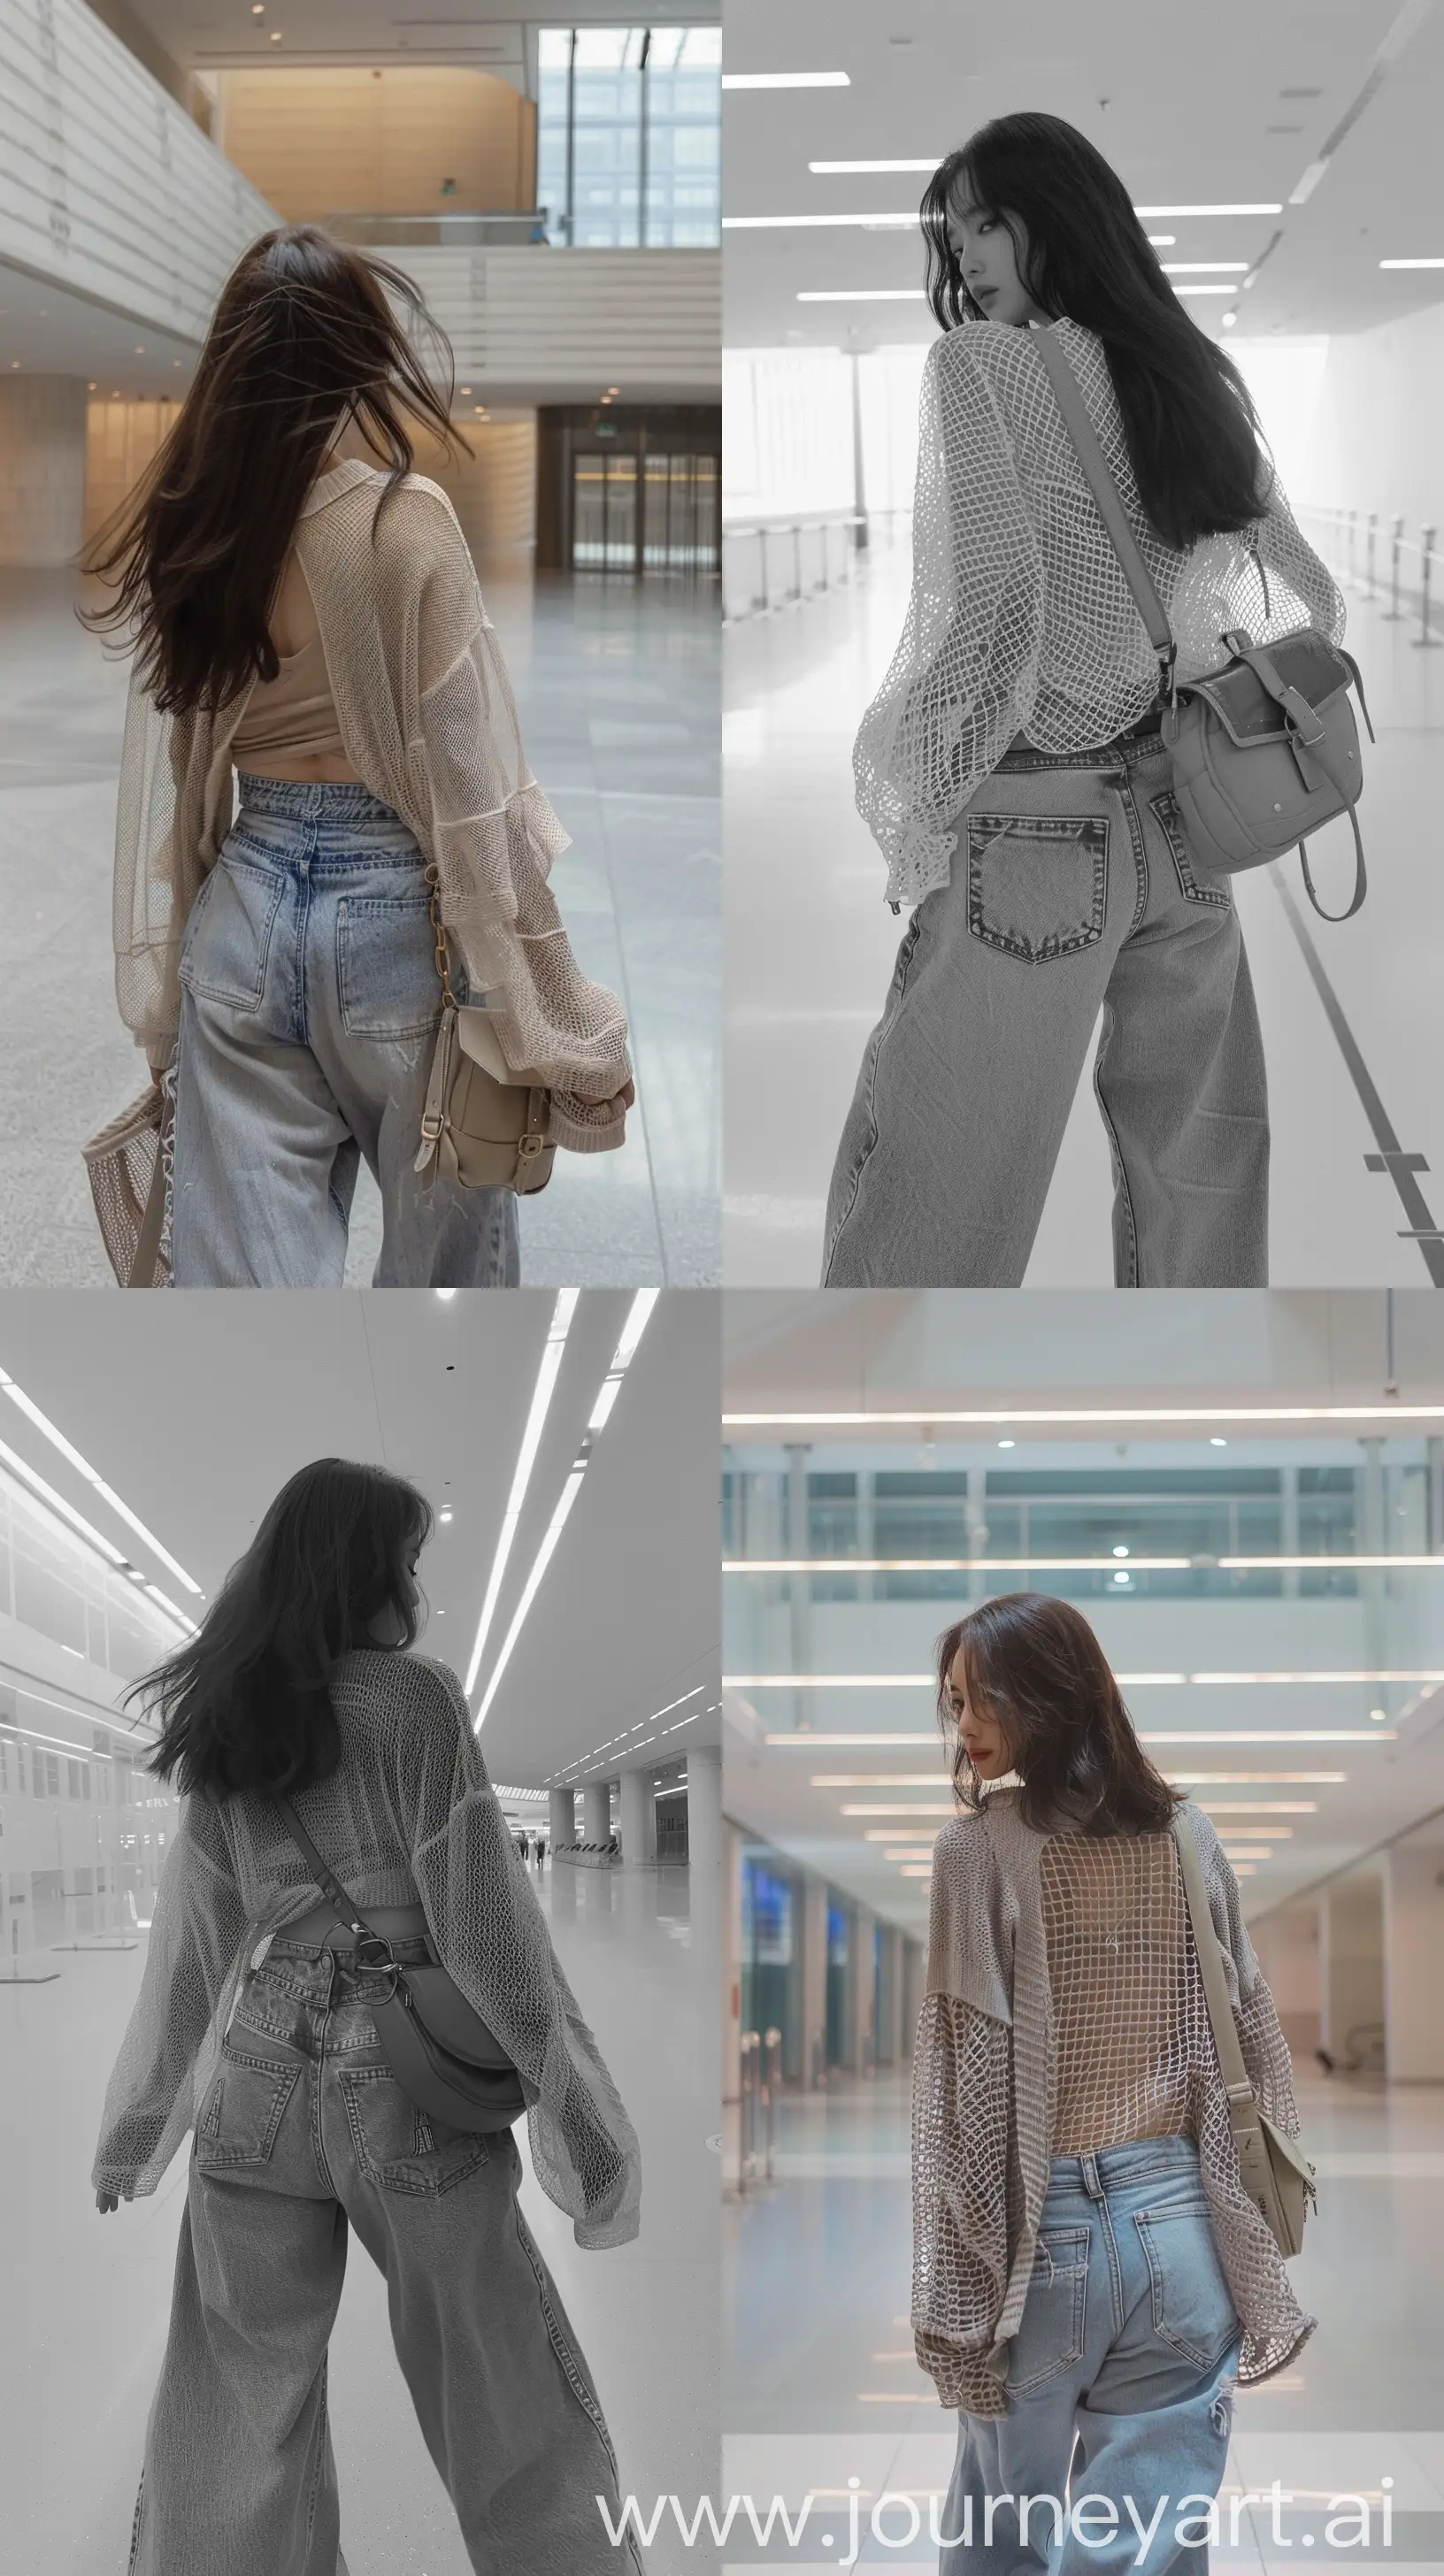 Fashionable-Selfie-of-Blackpinks-Jennie-in-Oversized-Jeans-and-Net-Cardigan